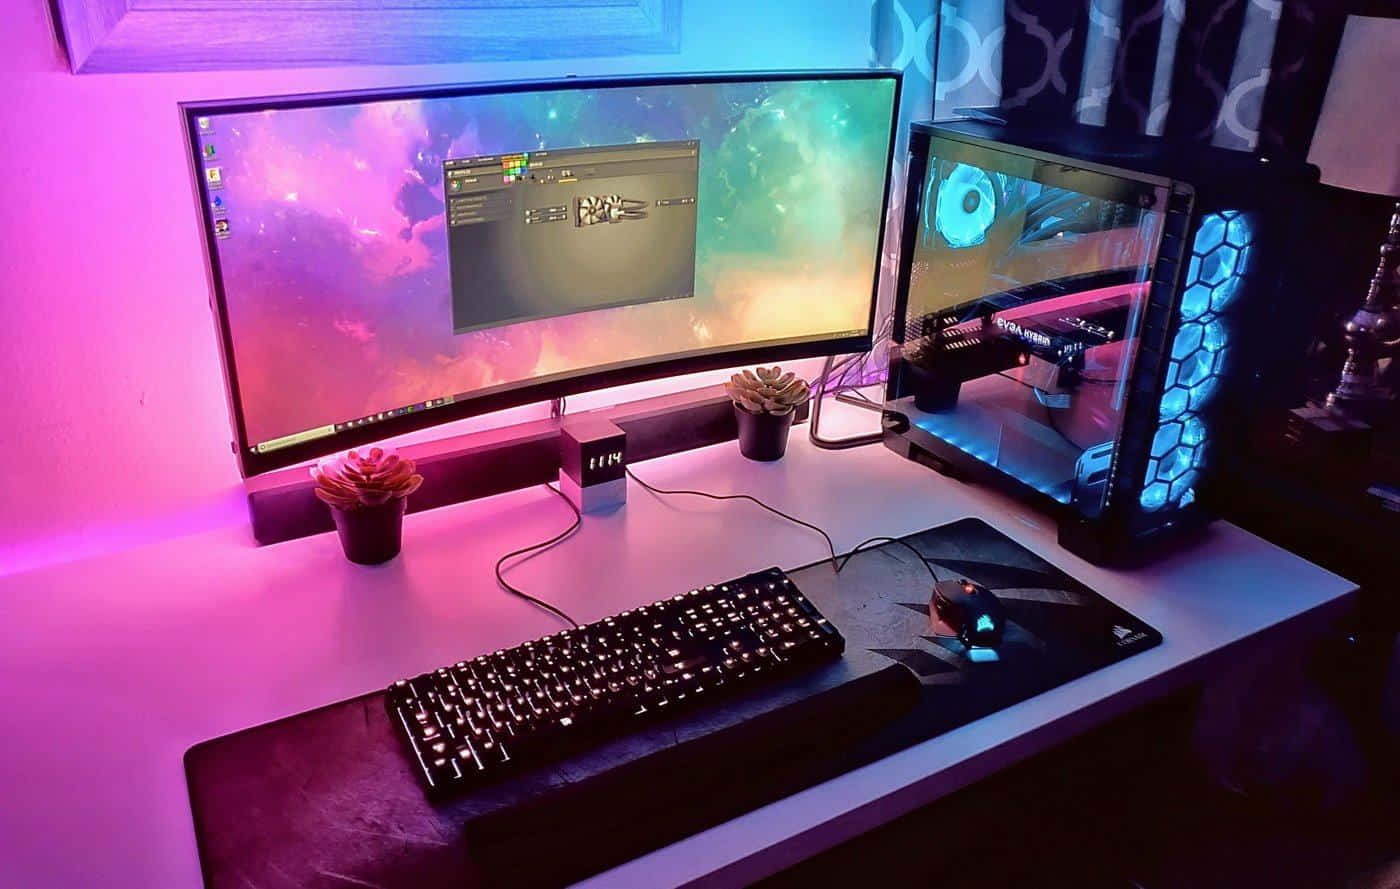 Enjoy the immersive gaming experience with an ultra-durable gaming PC setup. Wallpaper